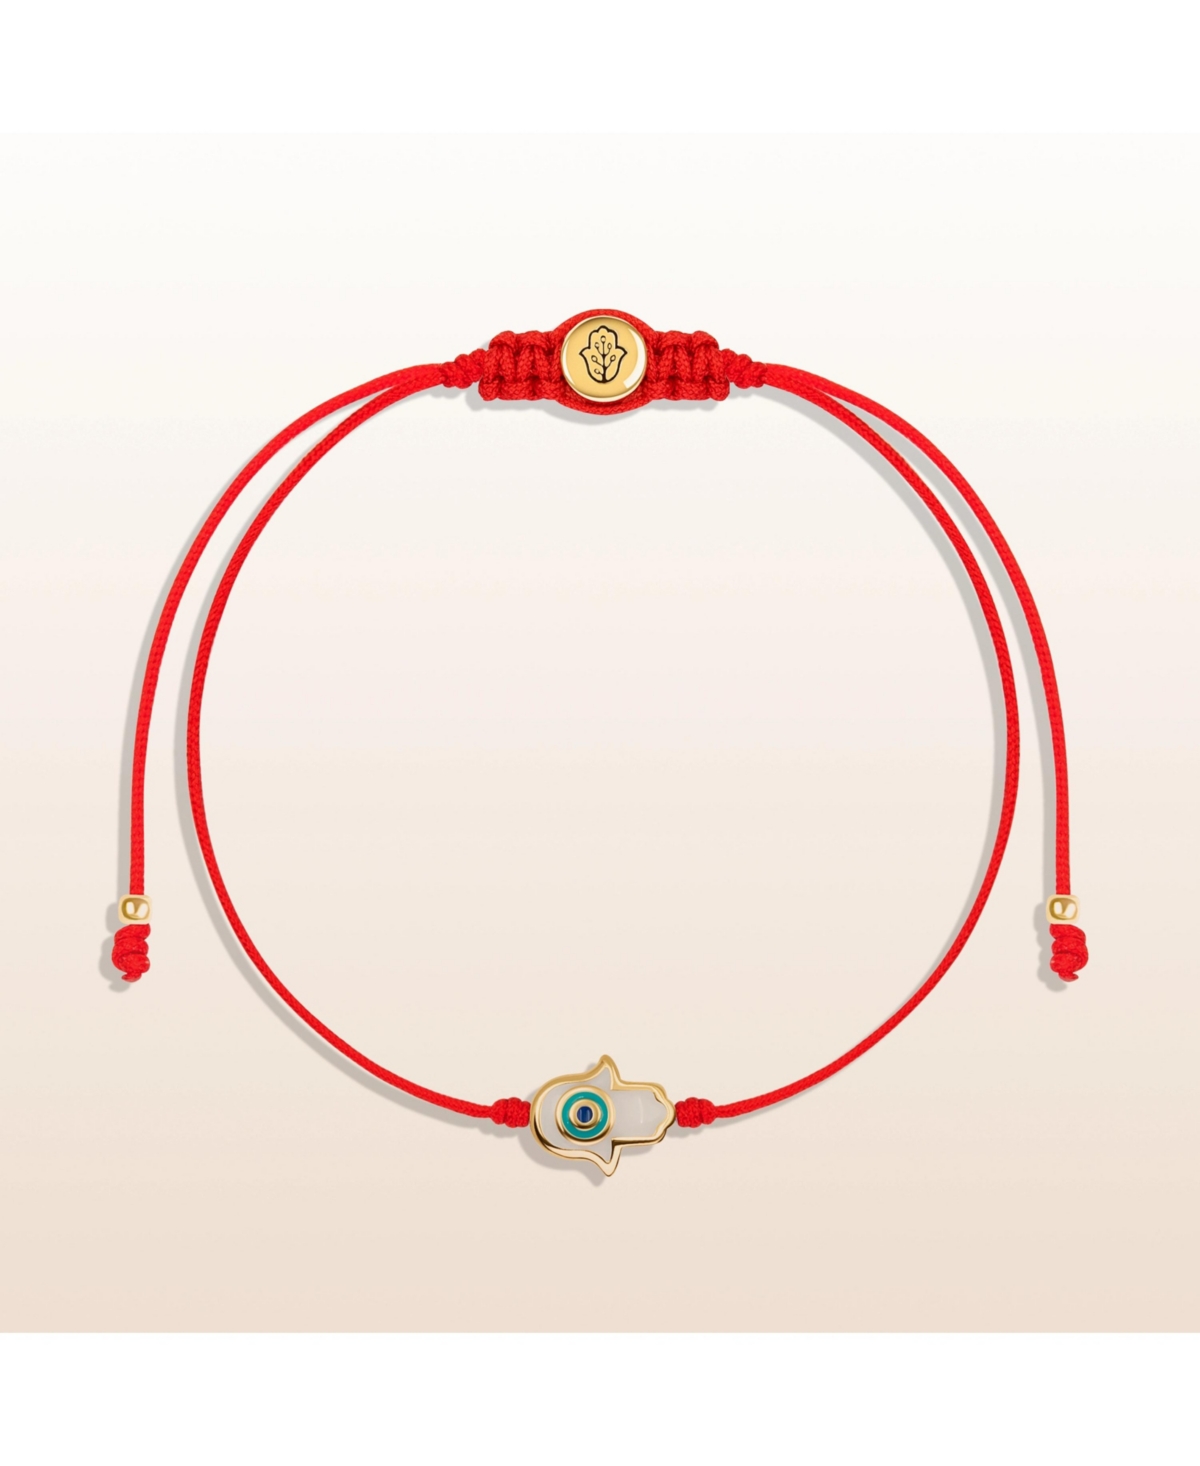 Charismatic Personality - White Enamel Hamsa Red String Bracelet - Red/gold/white/turquoise